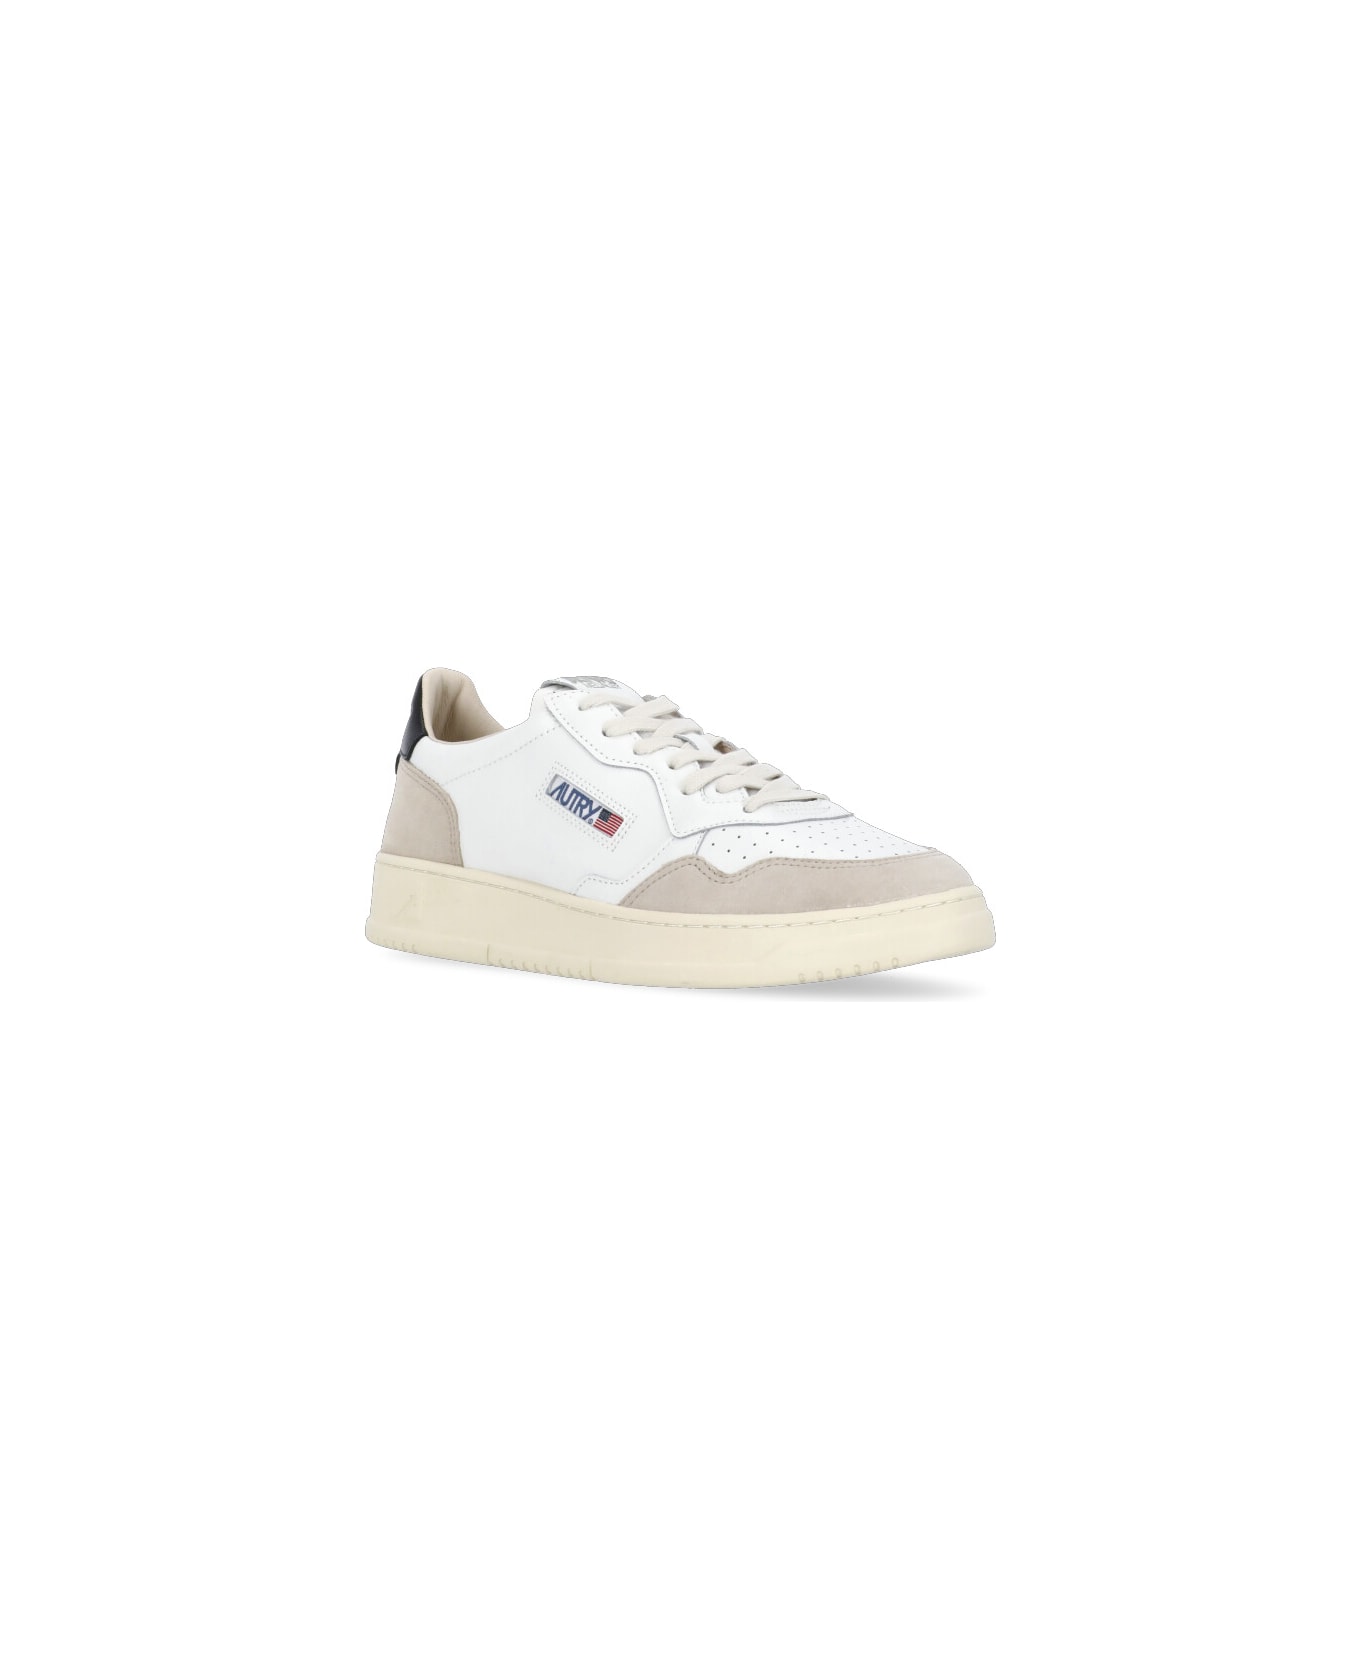 Autry Aulm Ls21 Sneakers - White スニーカー